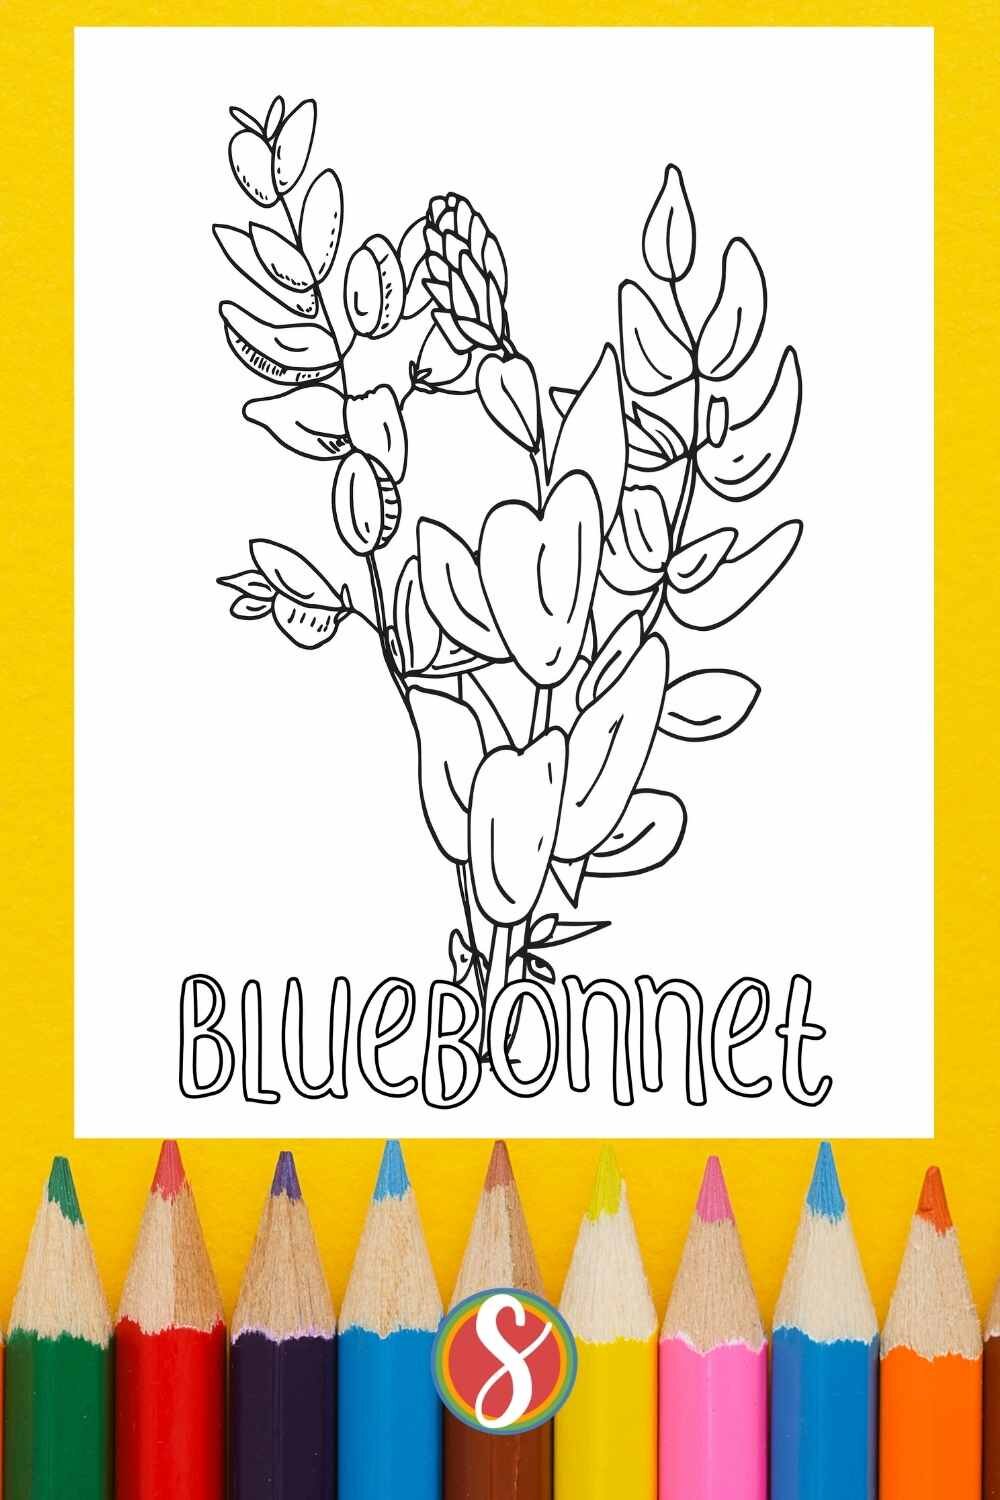 free coloring page with bluebonnet flowers.jpg